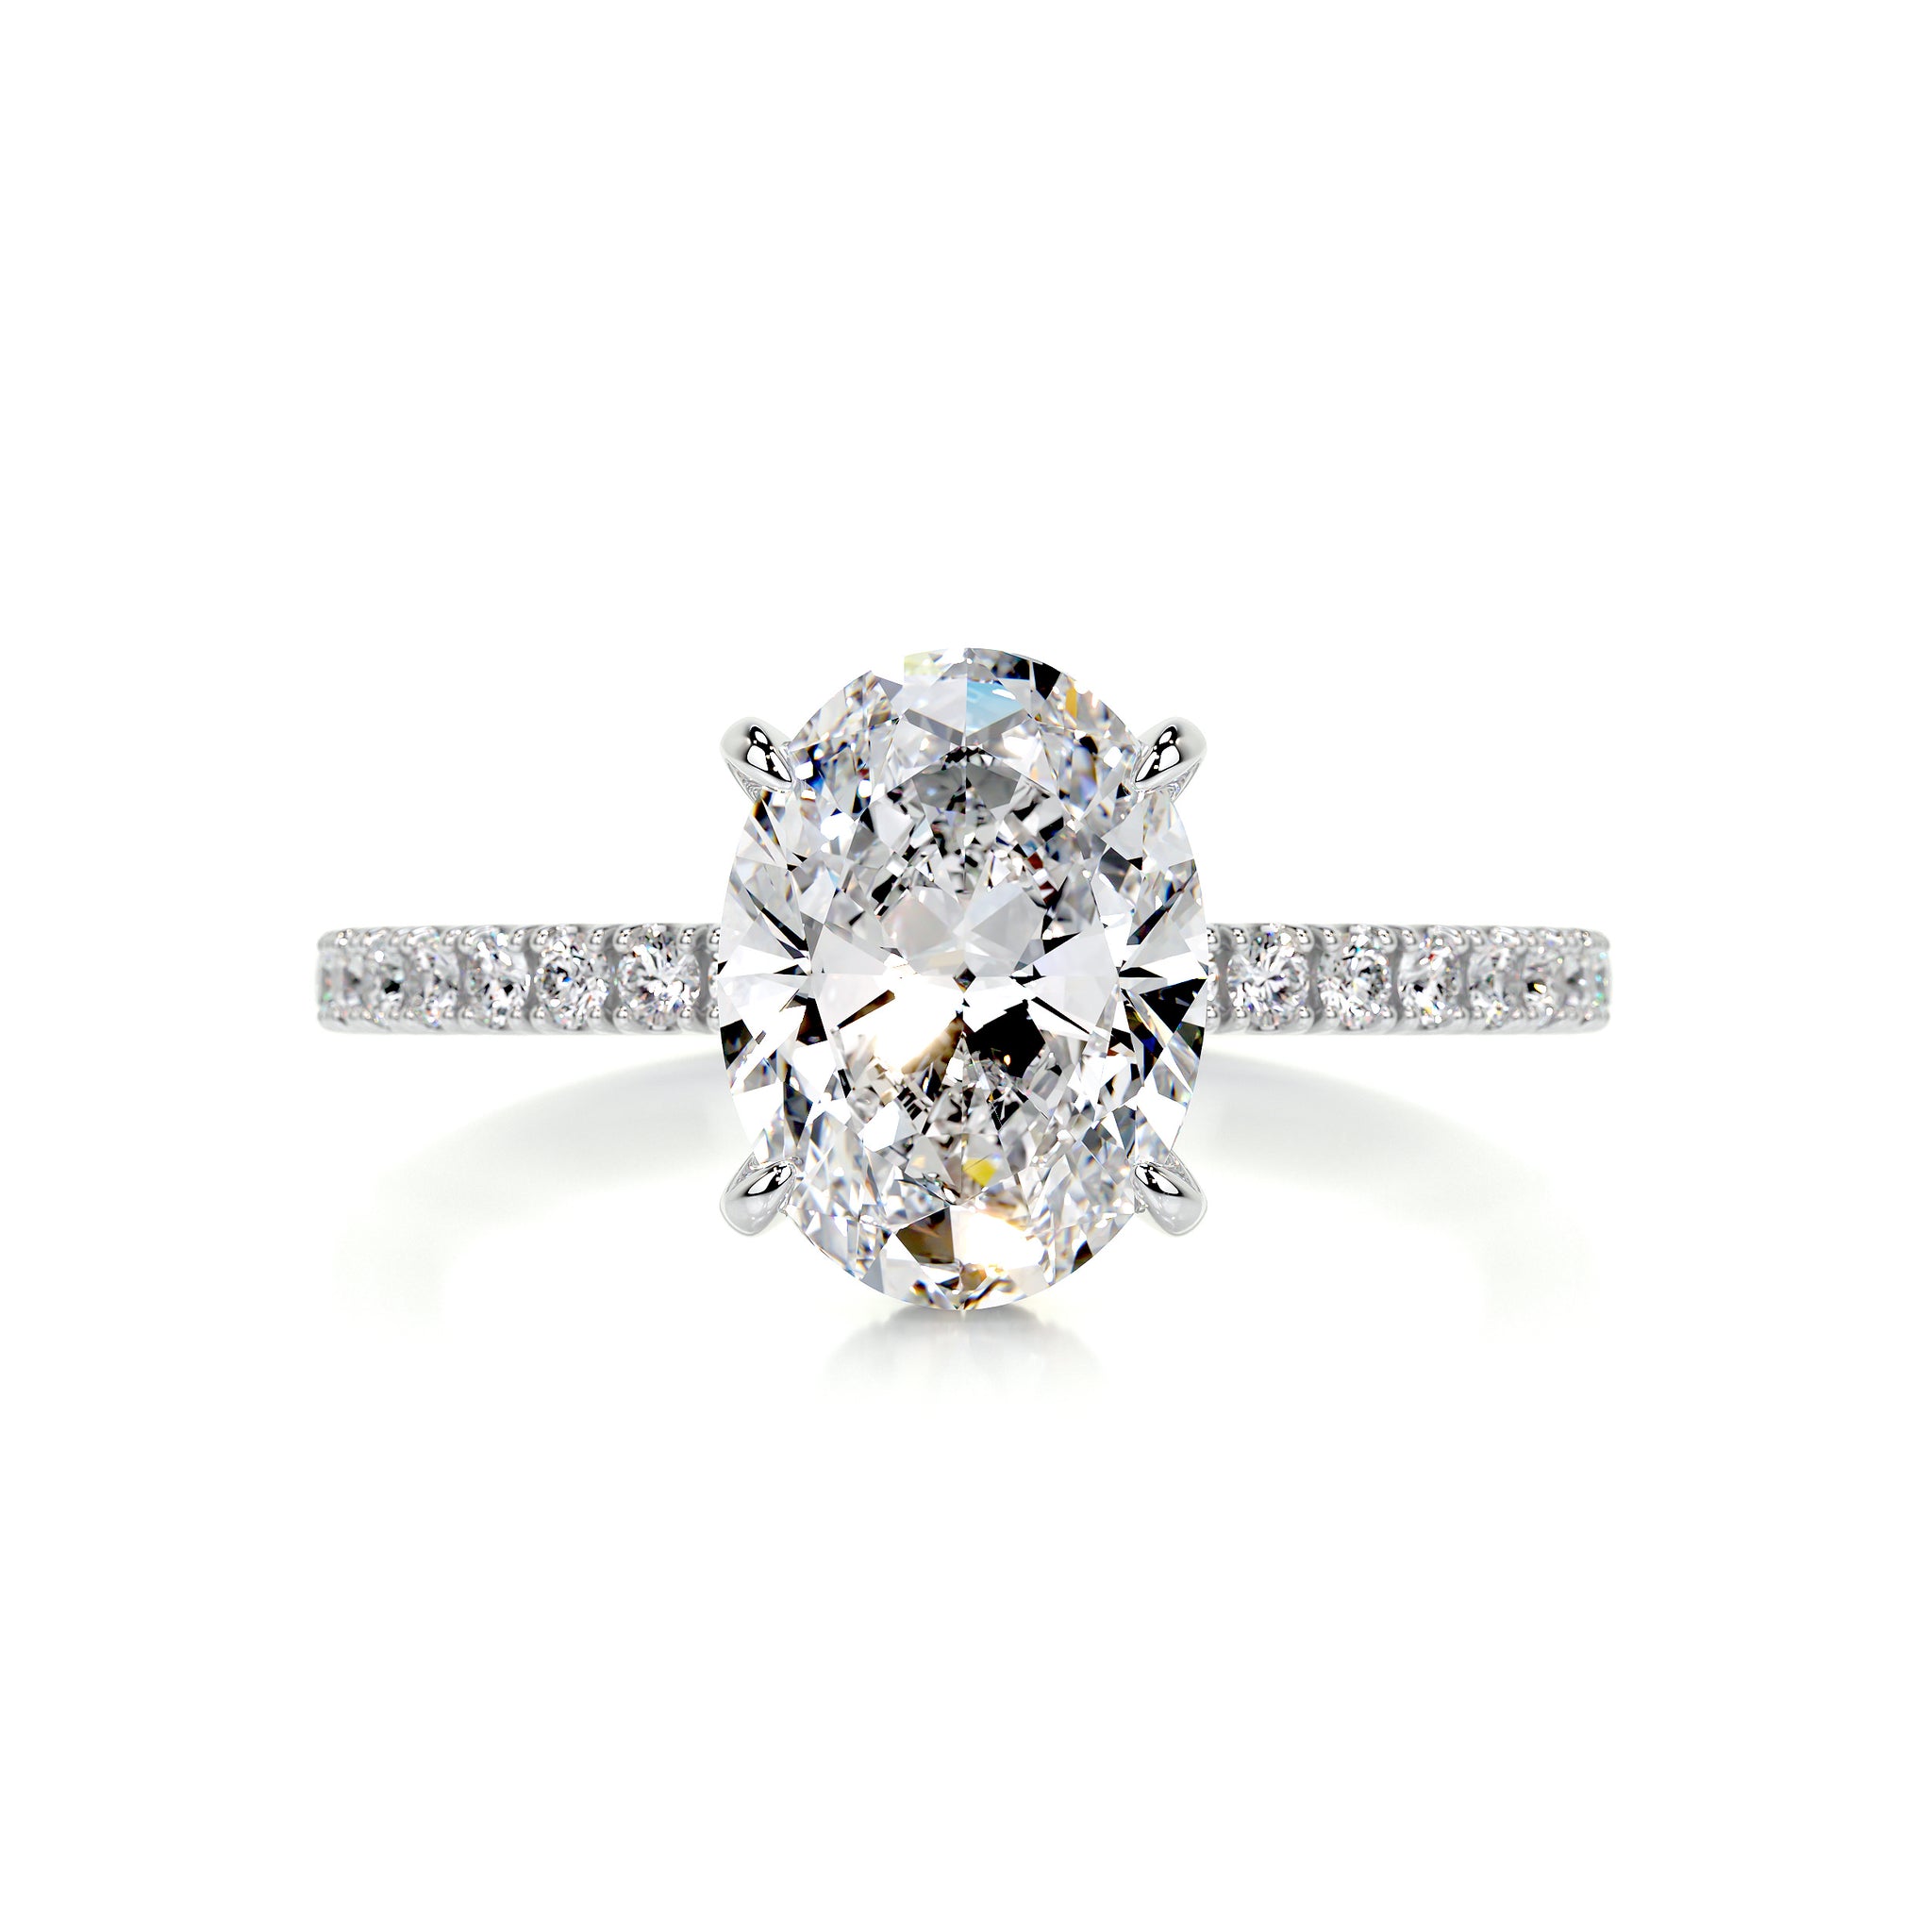 10 Engagement Ring Ideas From Top Jewelry Designers - Only Natural